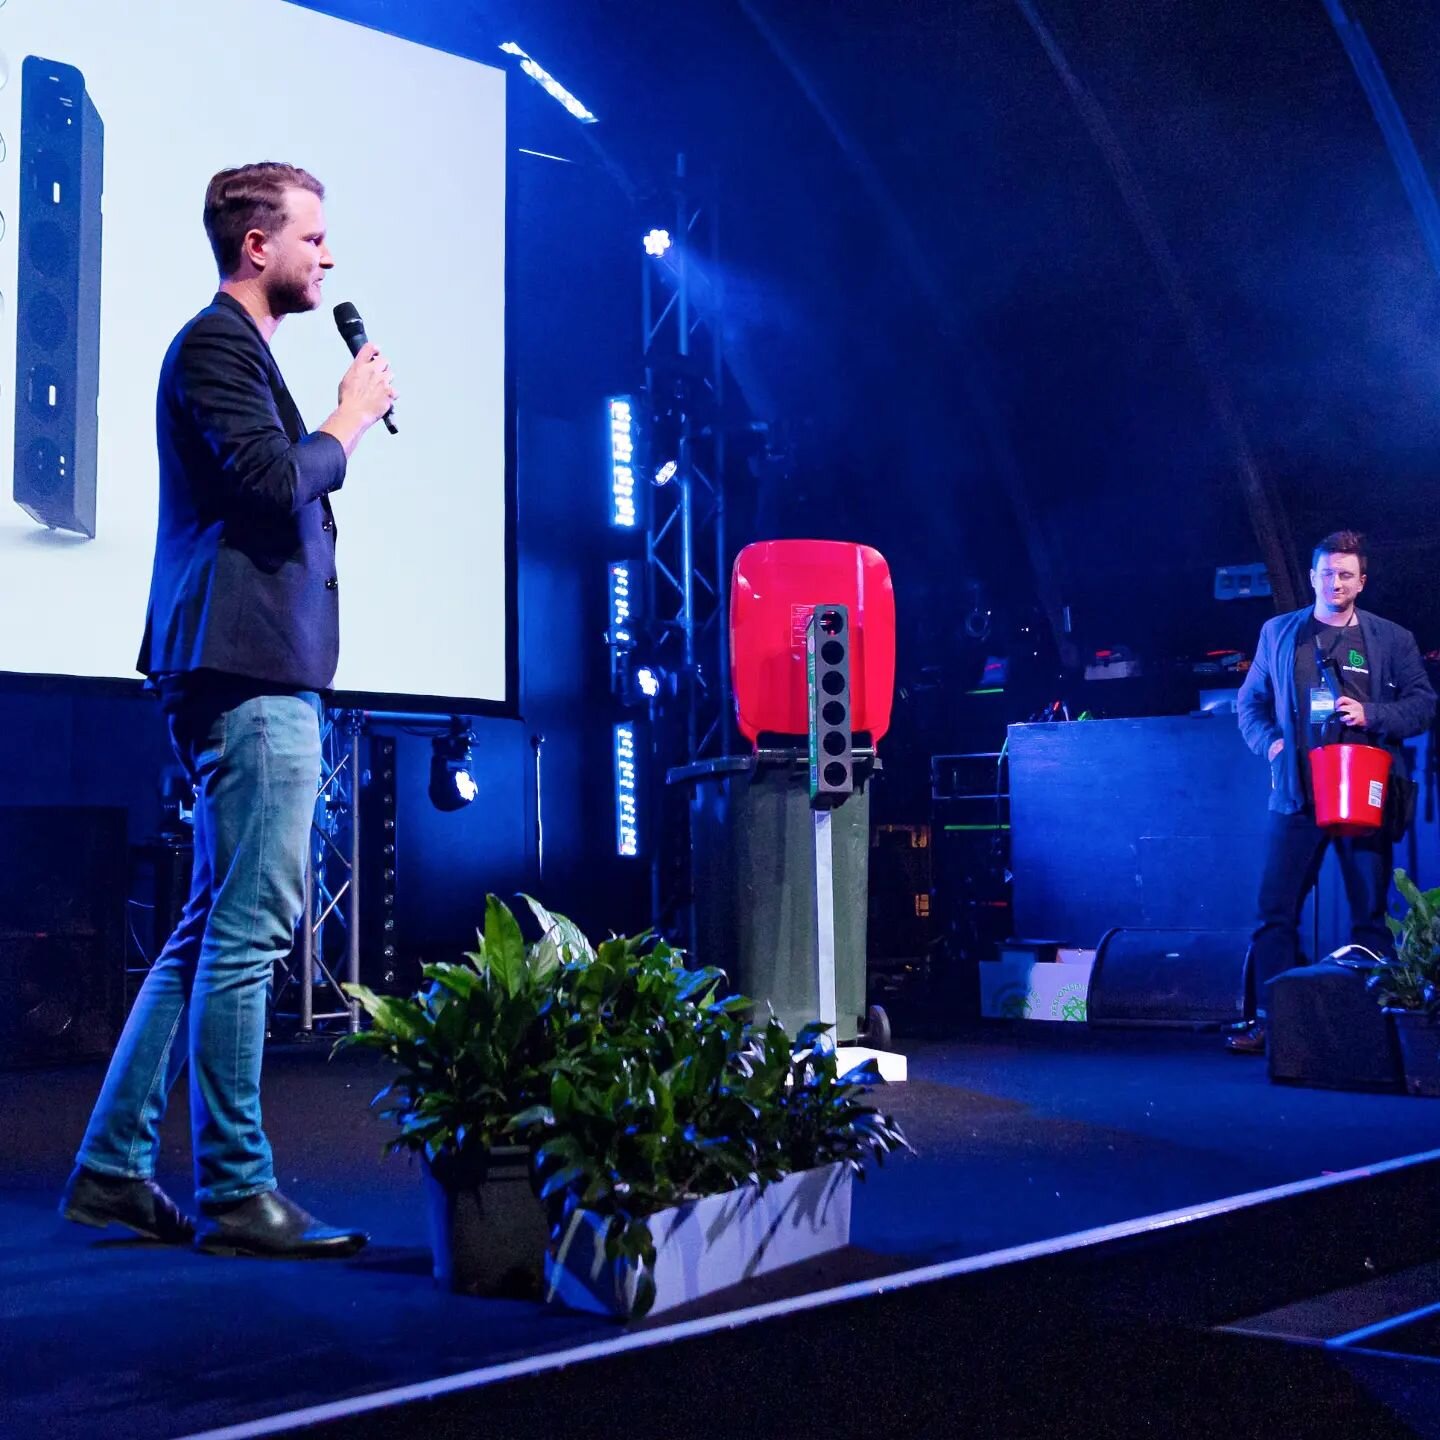 Bin Bypass were proud to present at the @impactboomorg Social Enterprise Showcase last week at @thetriffid in Brisbin.
Our founders successfully completed a 20 week accelerator program funded by the Qld Government under the Social Enterprise Growth f